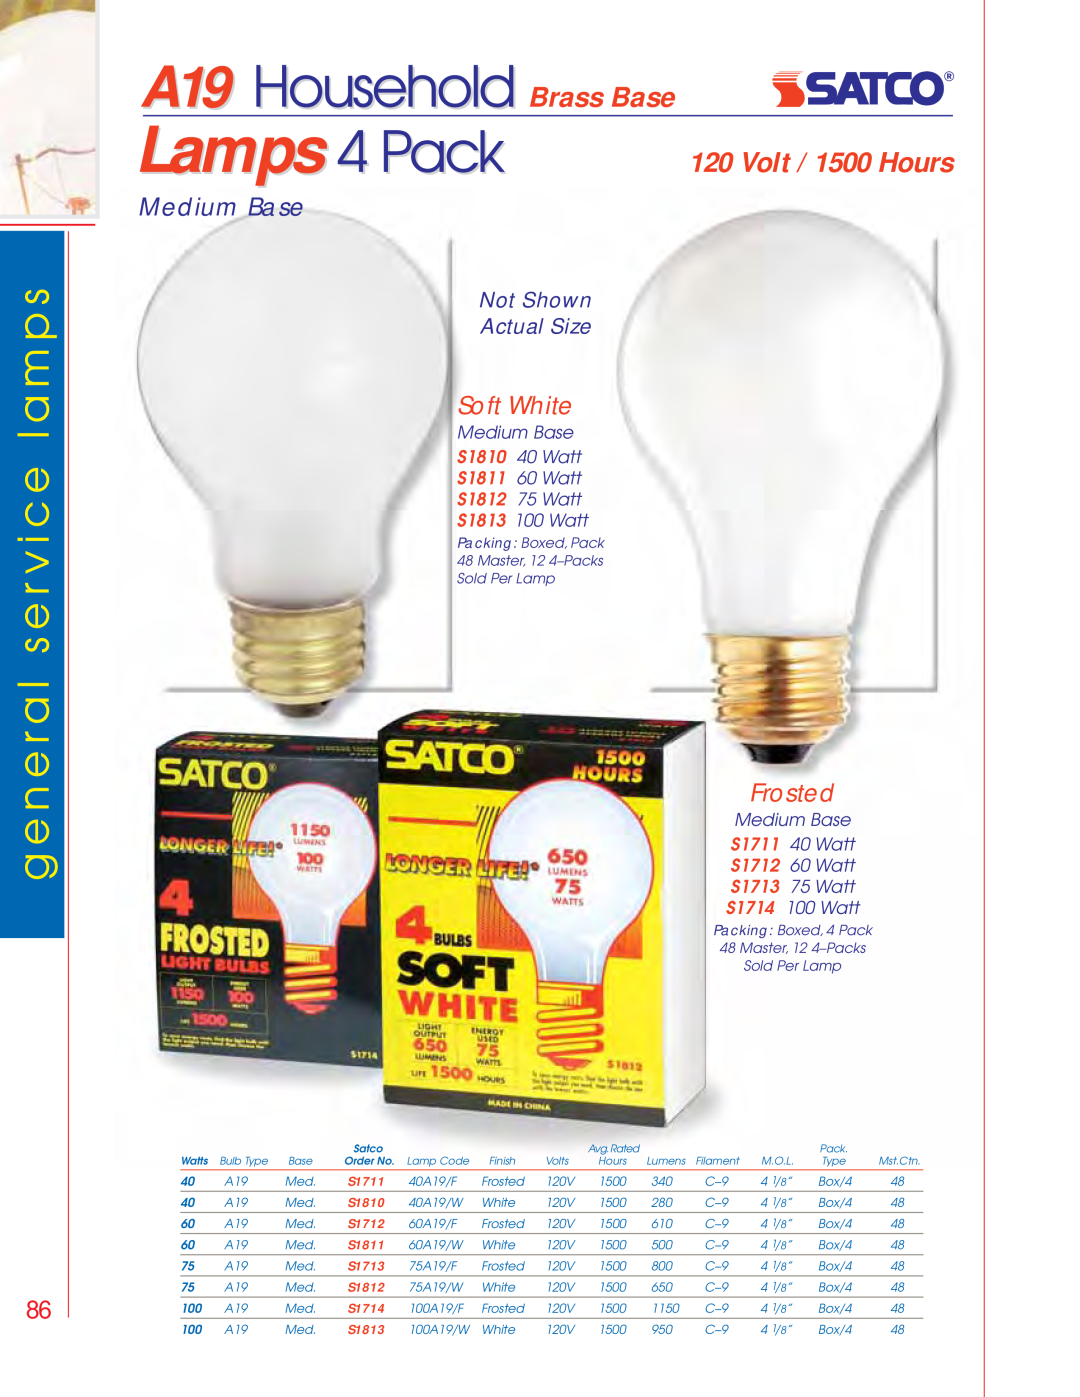 Satco Products S3692 Lamps 4 Pack, A19 Household Brass Base, Soft White, Not Shown Actual Size, Volt / 1500 Hours, Frosted 